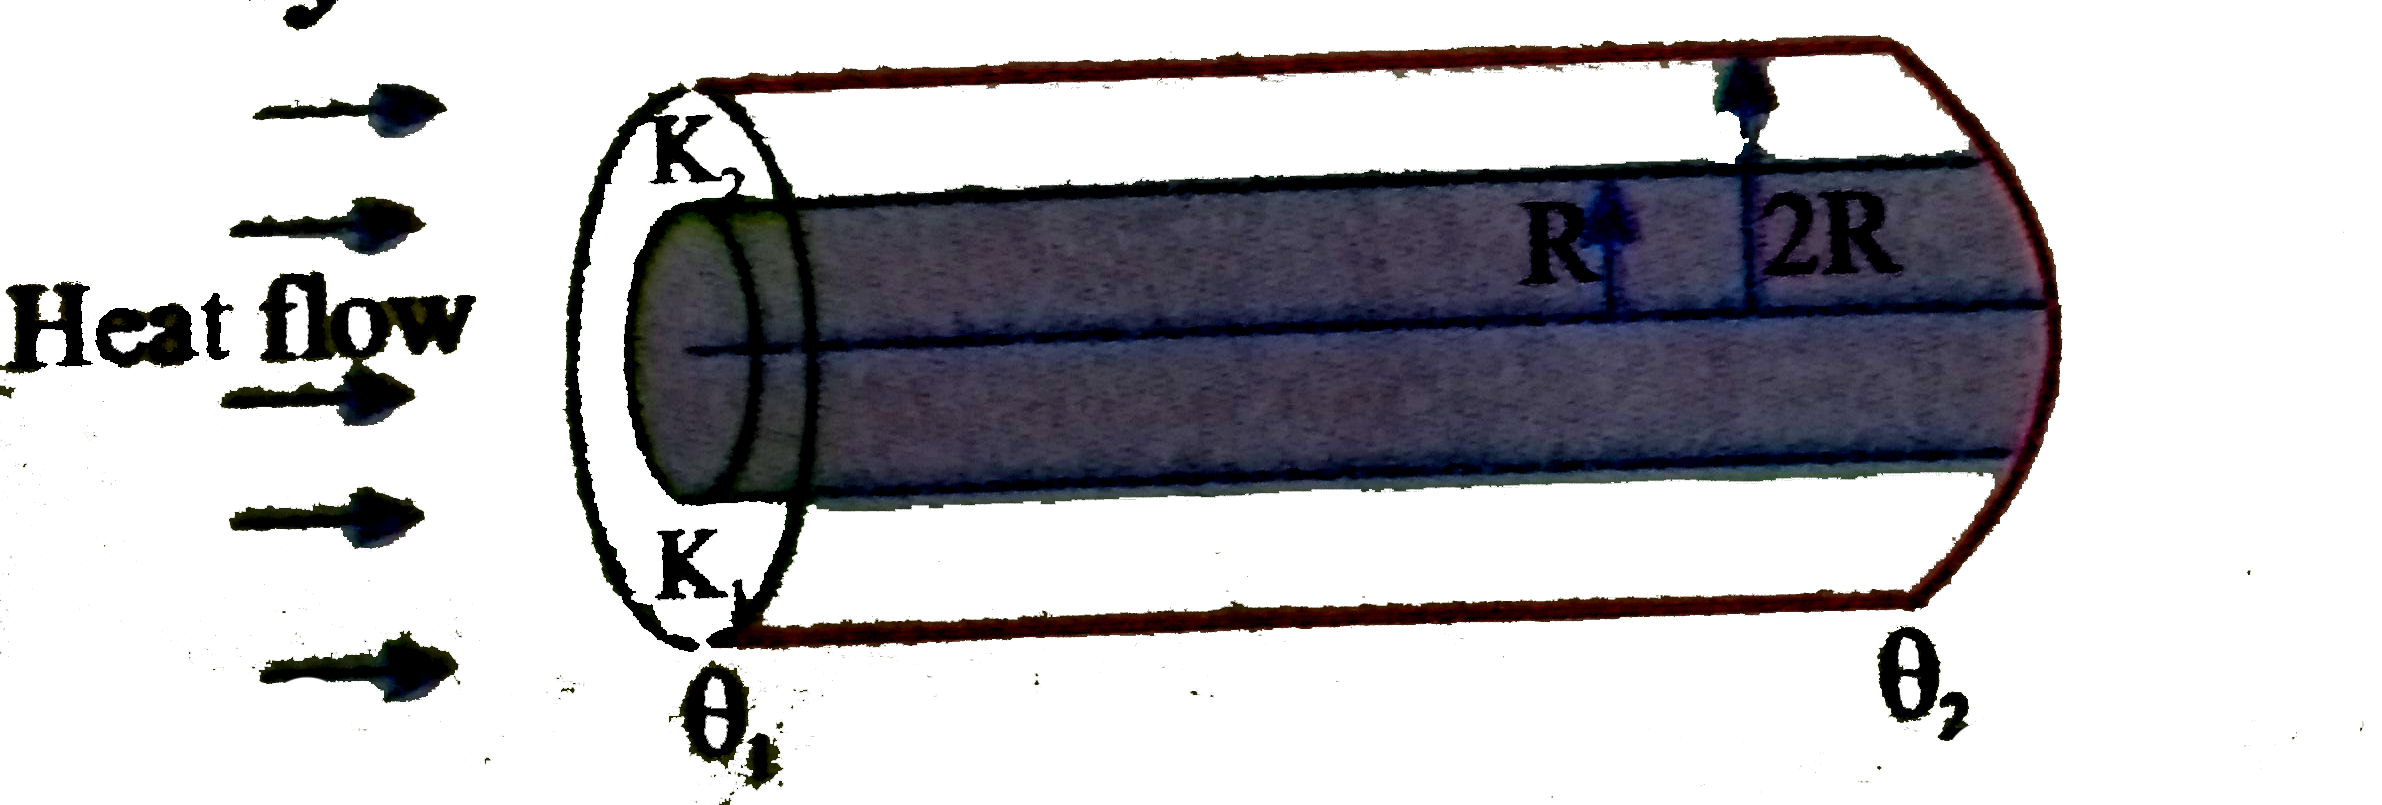 A cylinder of radius R made of a material of thermal conductivity K(1) is surrounded by cylindrical shell of inner radius R and outer radius 2R made of a material of thermal con-ductivity K(2) The two ends of the combined system are maintained at two differnet tem-peratures There is no loss of heat across the cylindrical surface and system is in steady state What is the effective thermal conductivity of the system    .